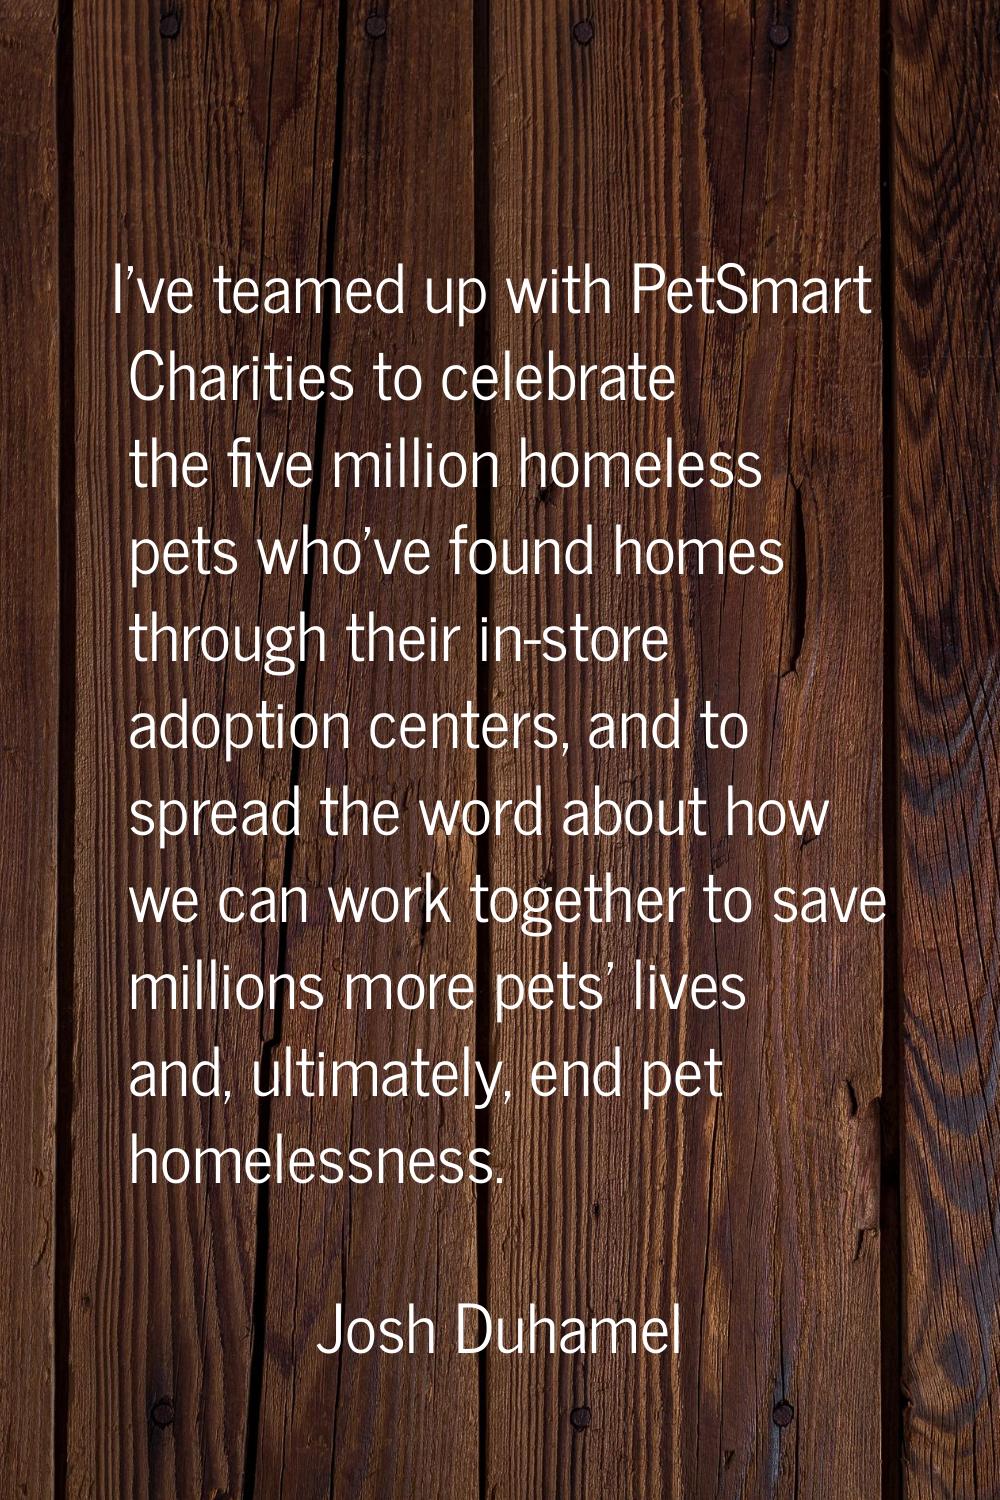 I've teamed up with PetSmart Charities to celebrate the five million homeless pets who've found hom